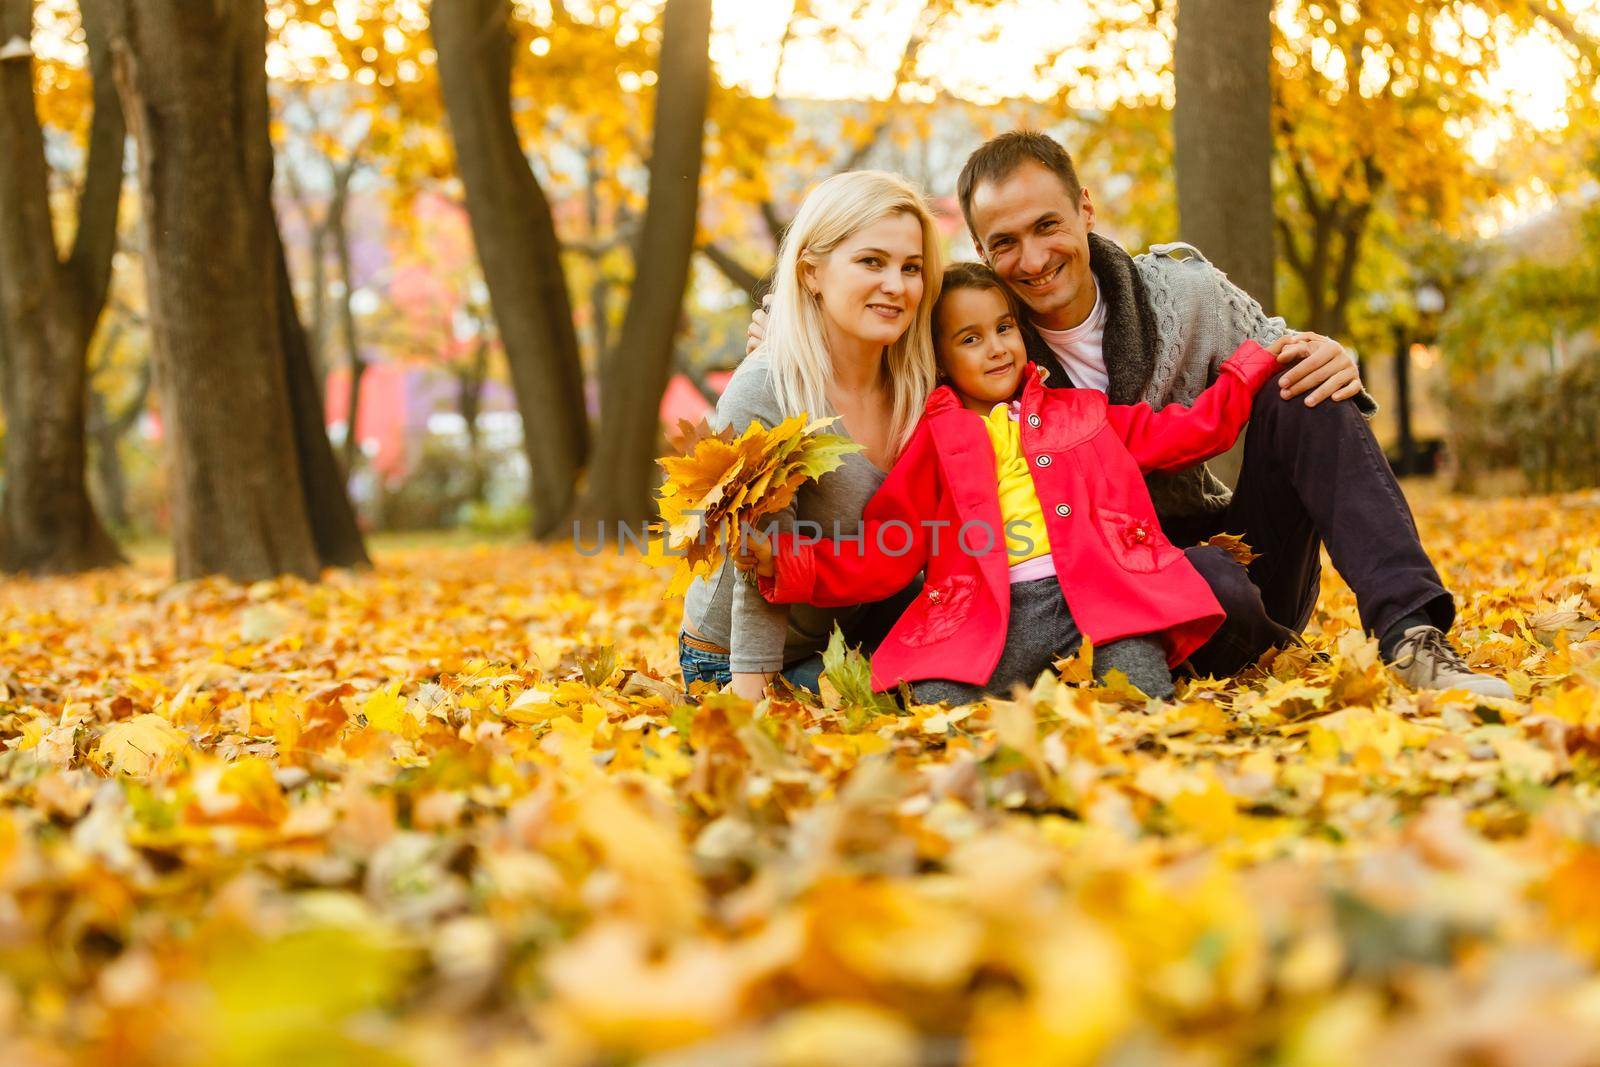 A Family enjoying golden leaves in autumn park by Andelov13